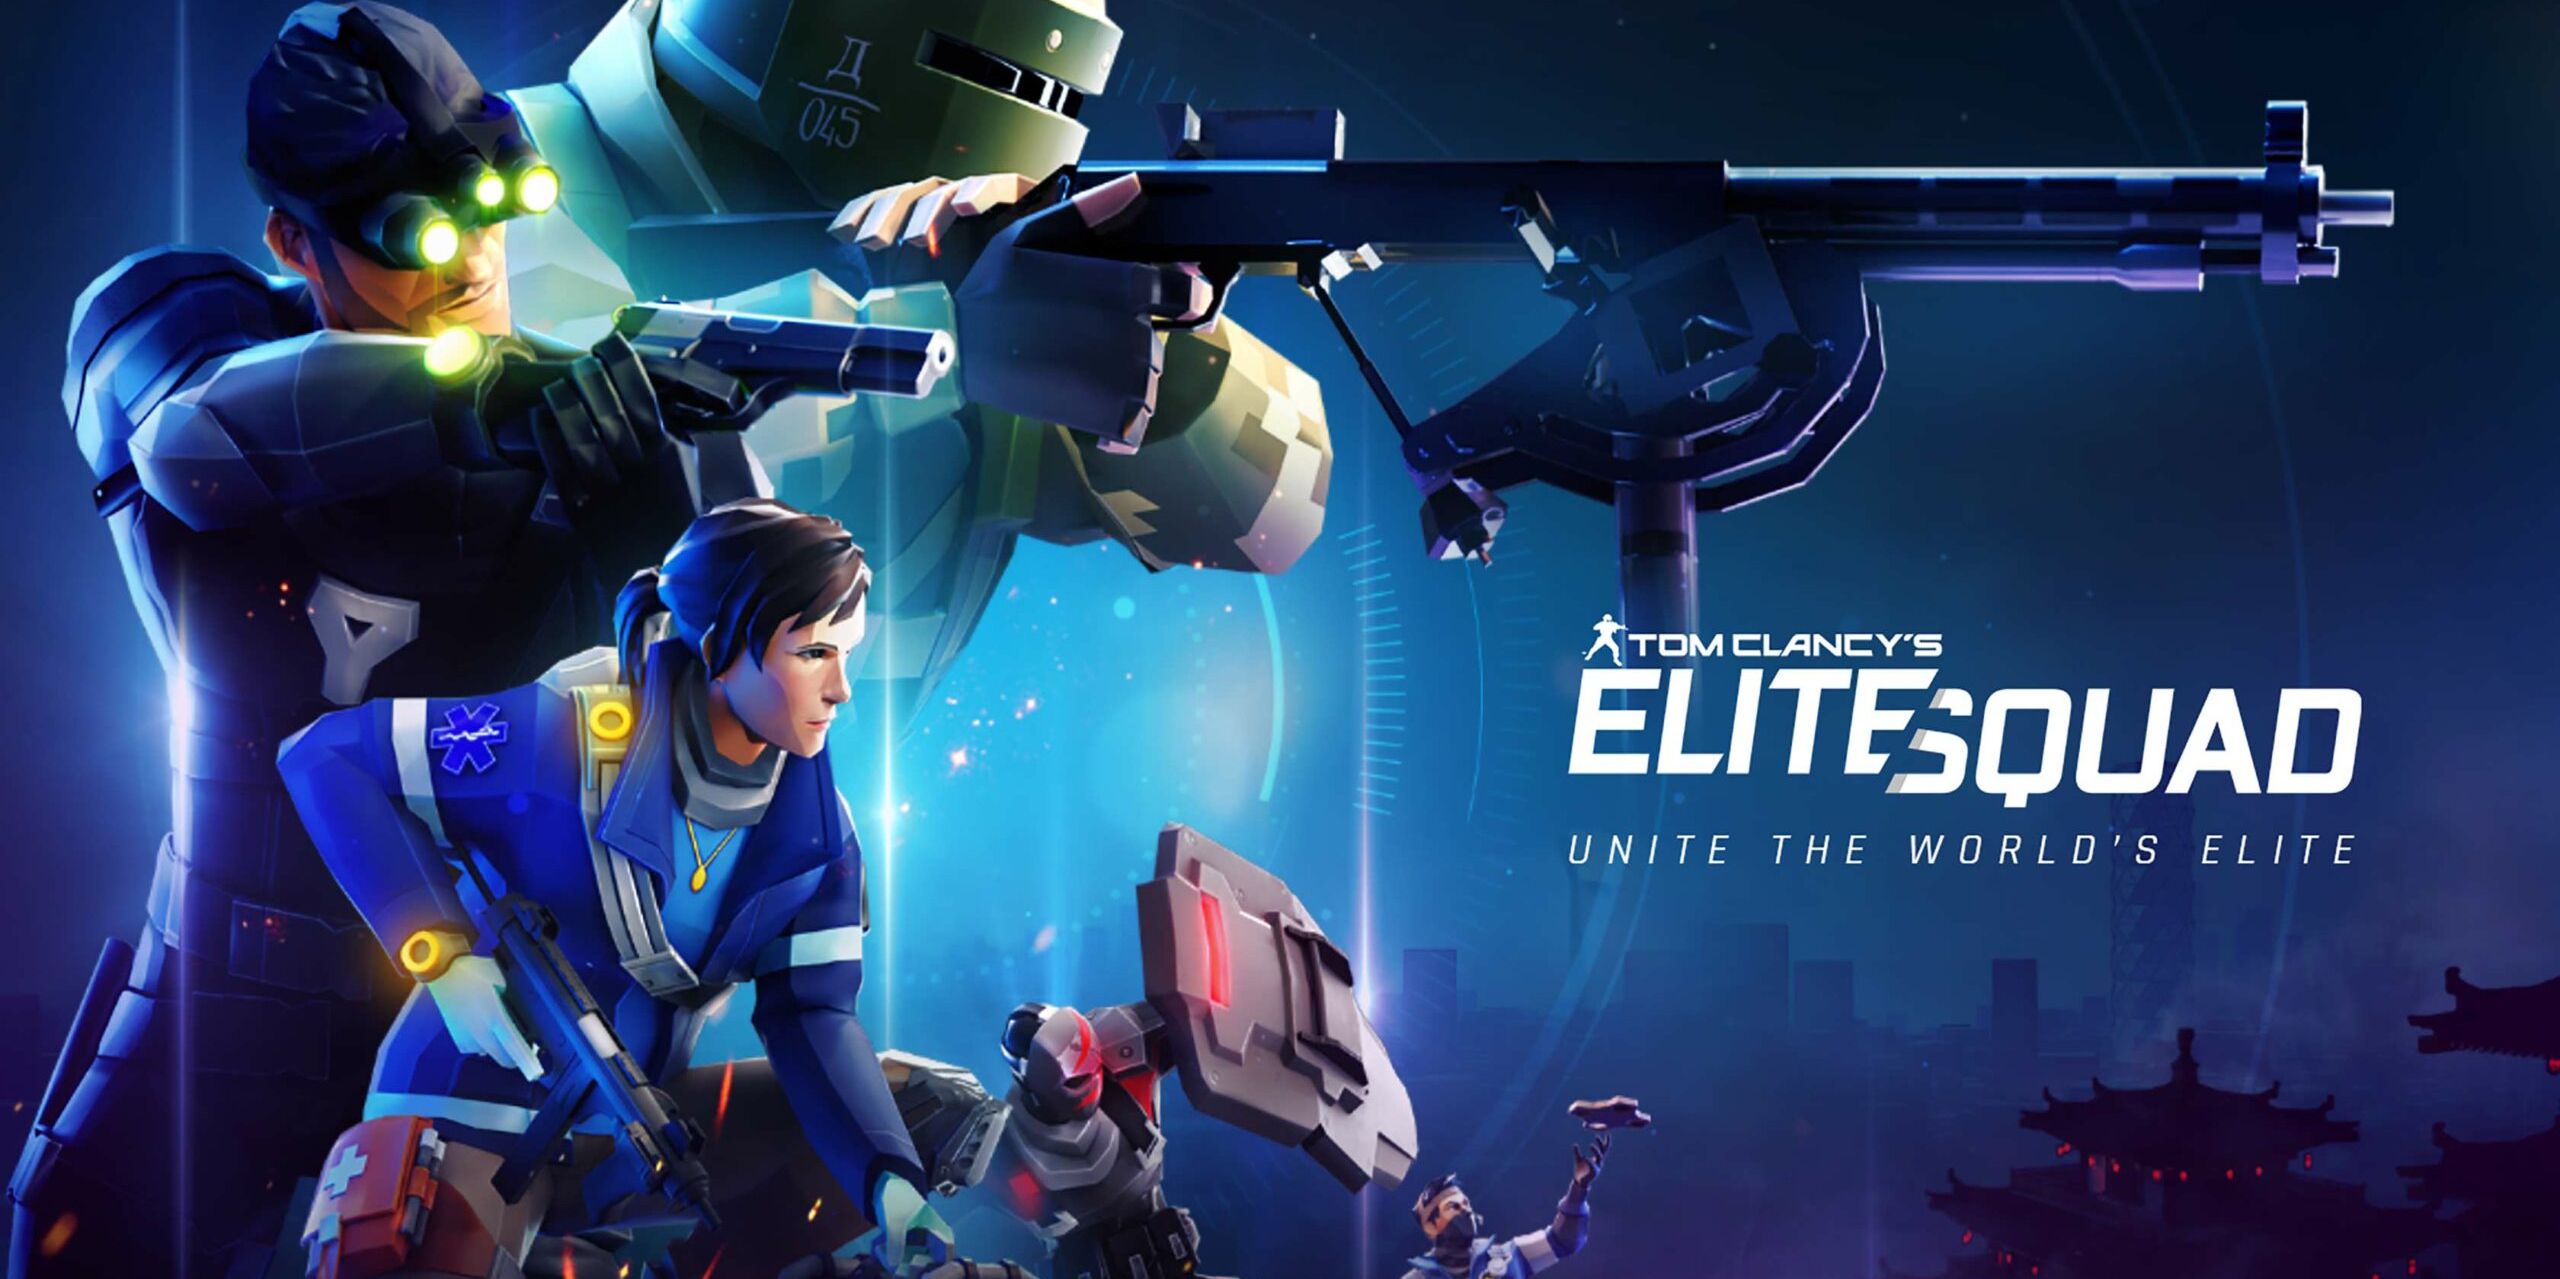 A promotional image for Elite Squad showing characters from across the various Tom Clancy shooters